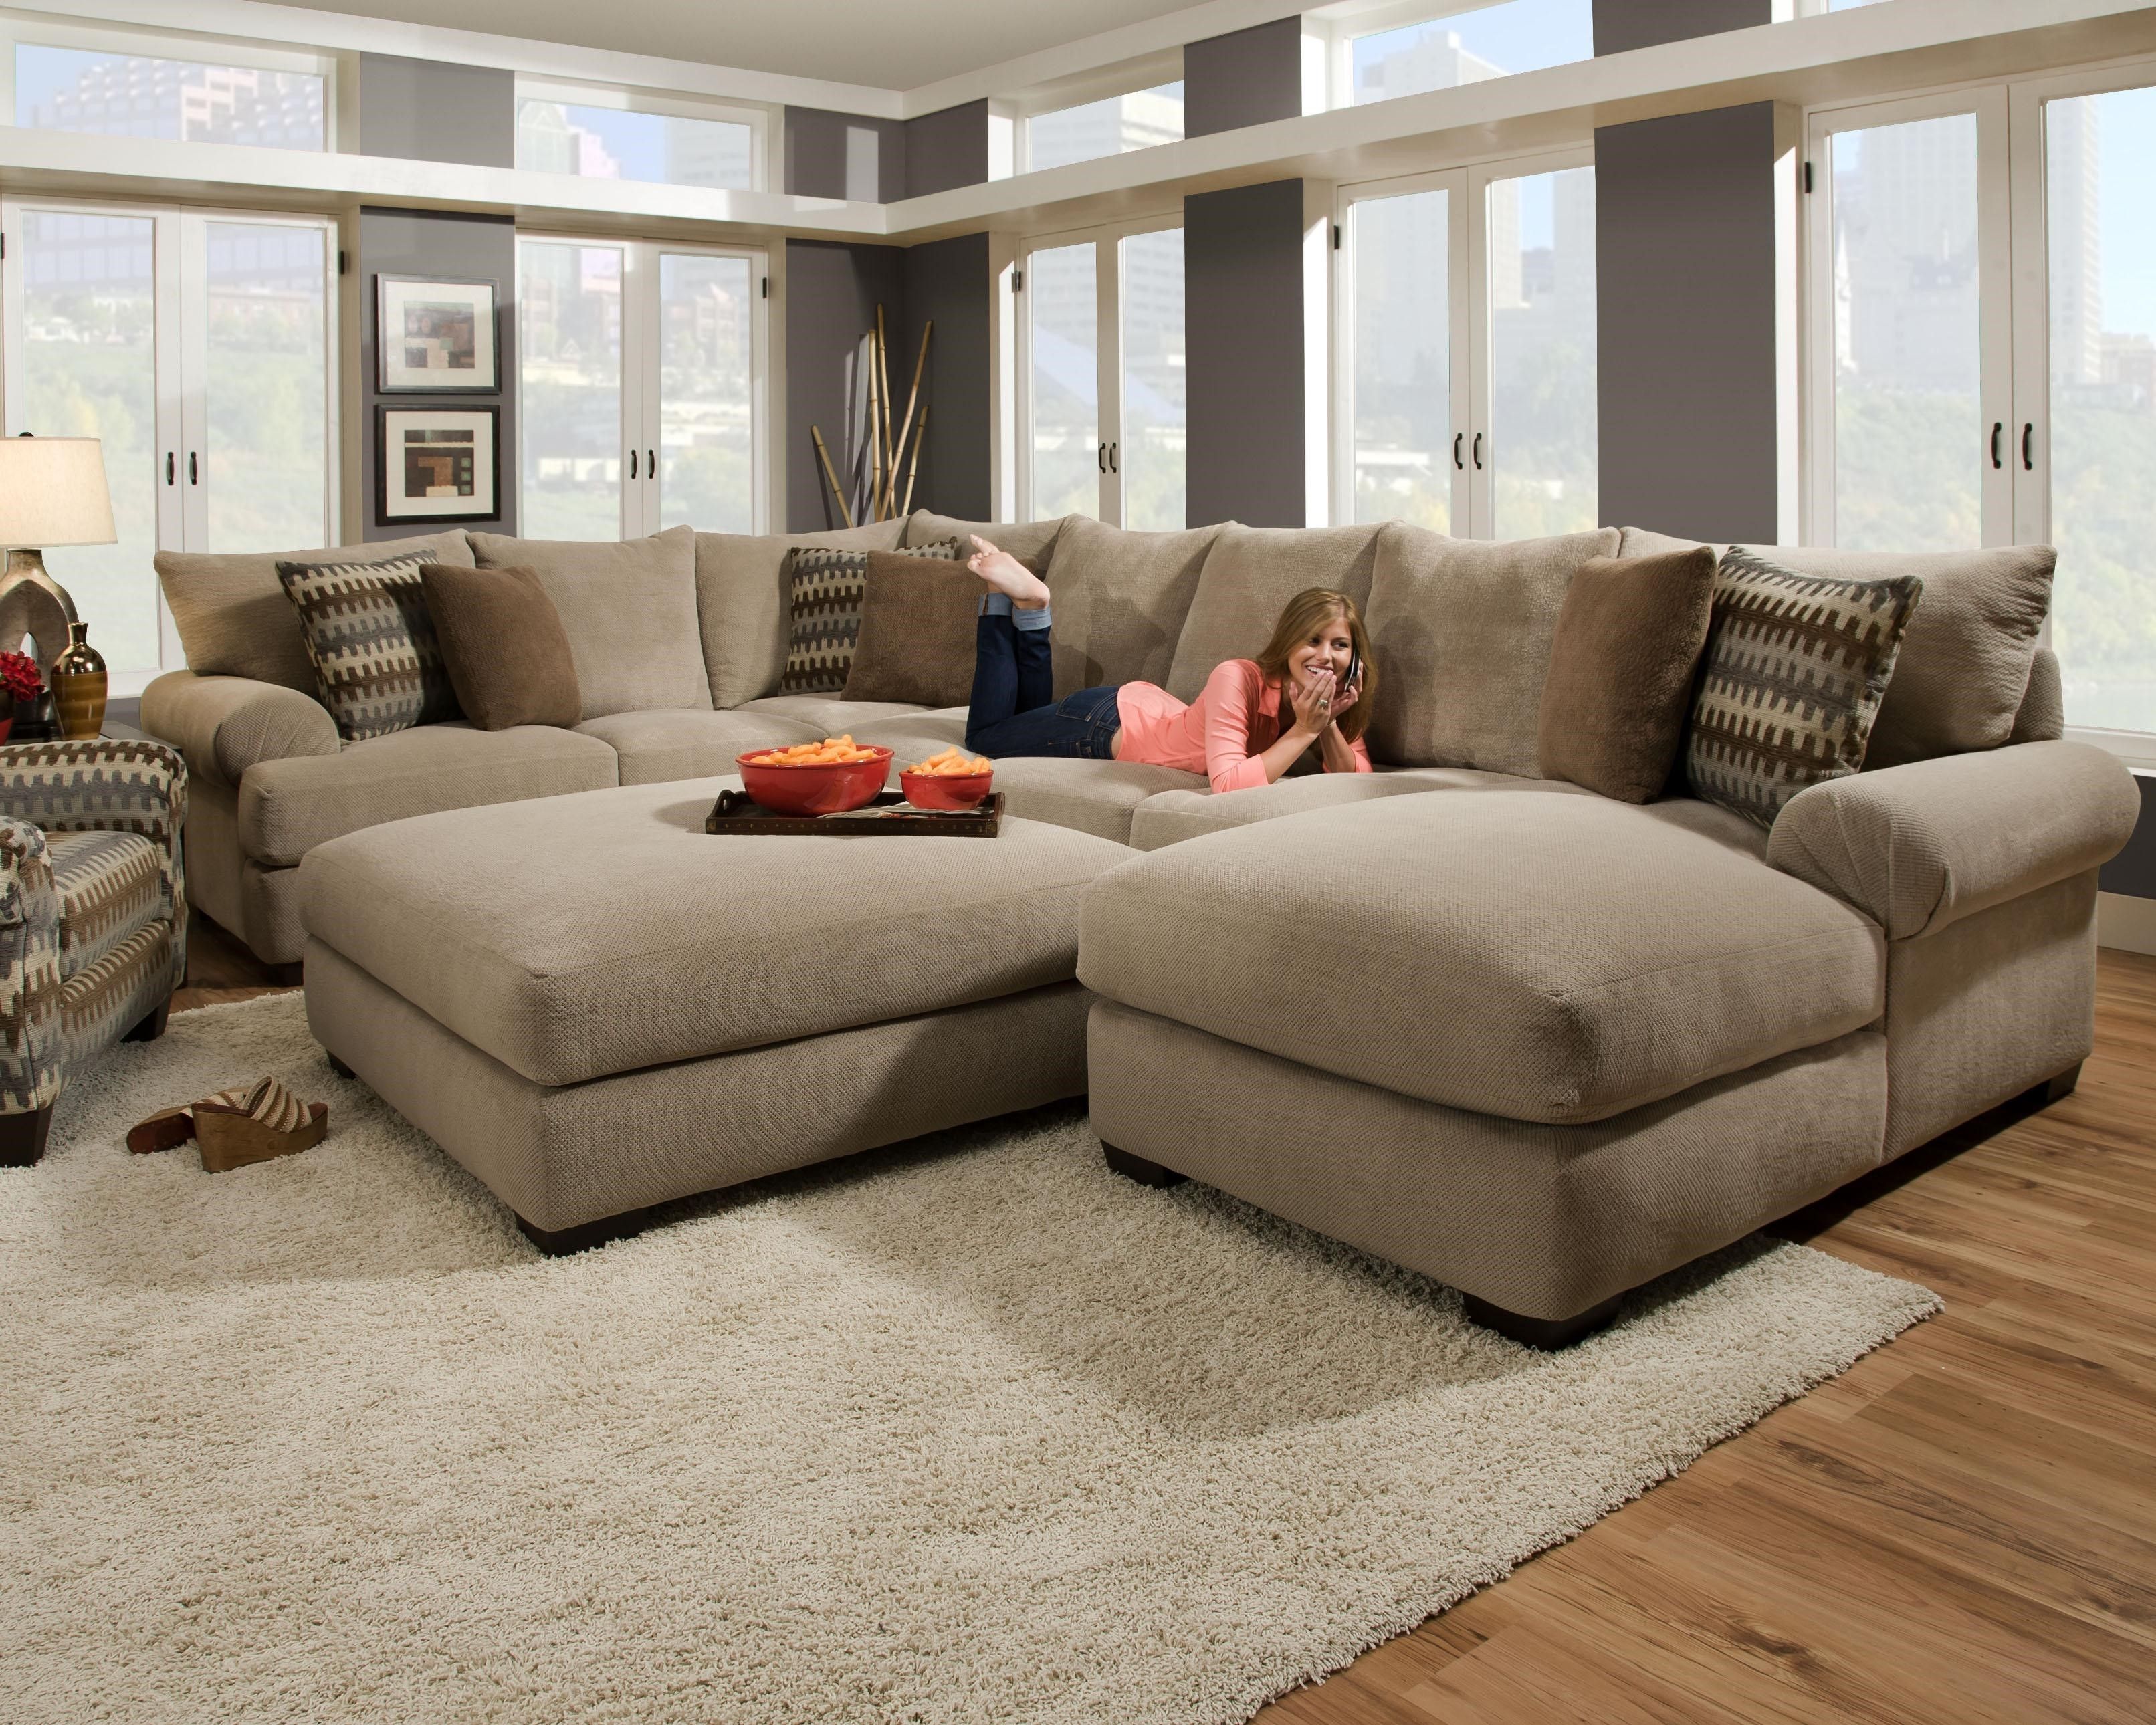 Cheap Sectional Sofas Charlotte Nc | Functionalities Throughout Sectional Sofas At Charlotte Nc (View 9 of 15)